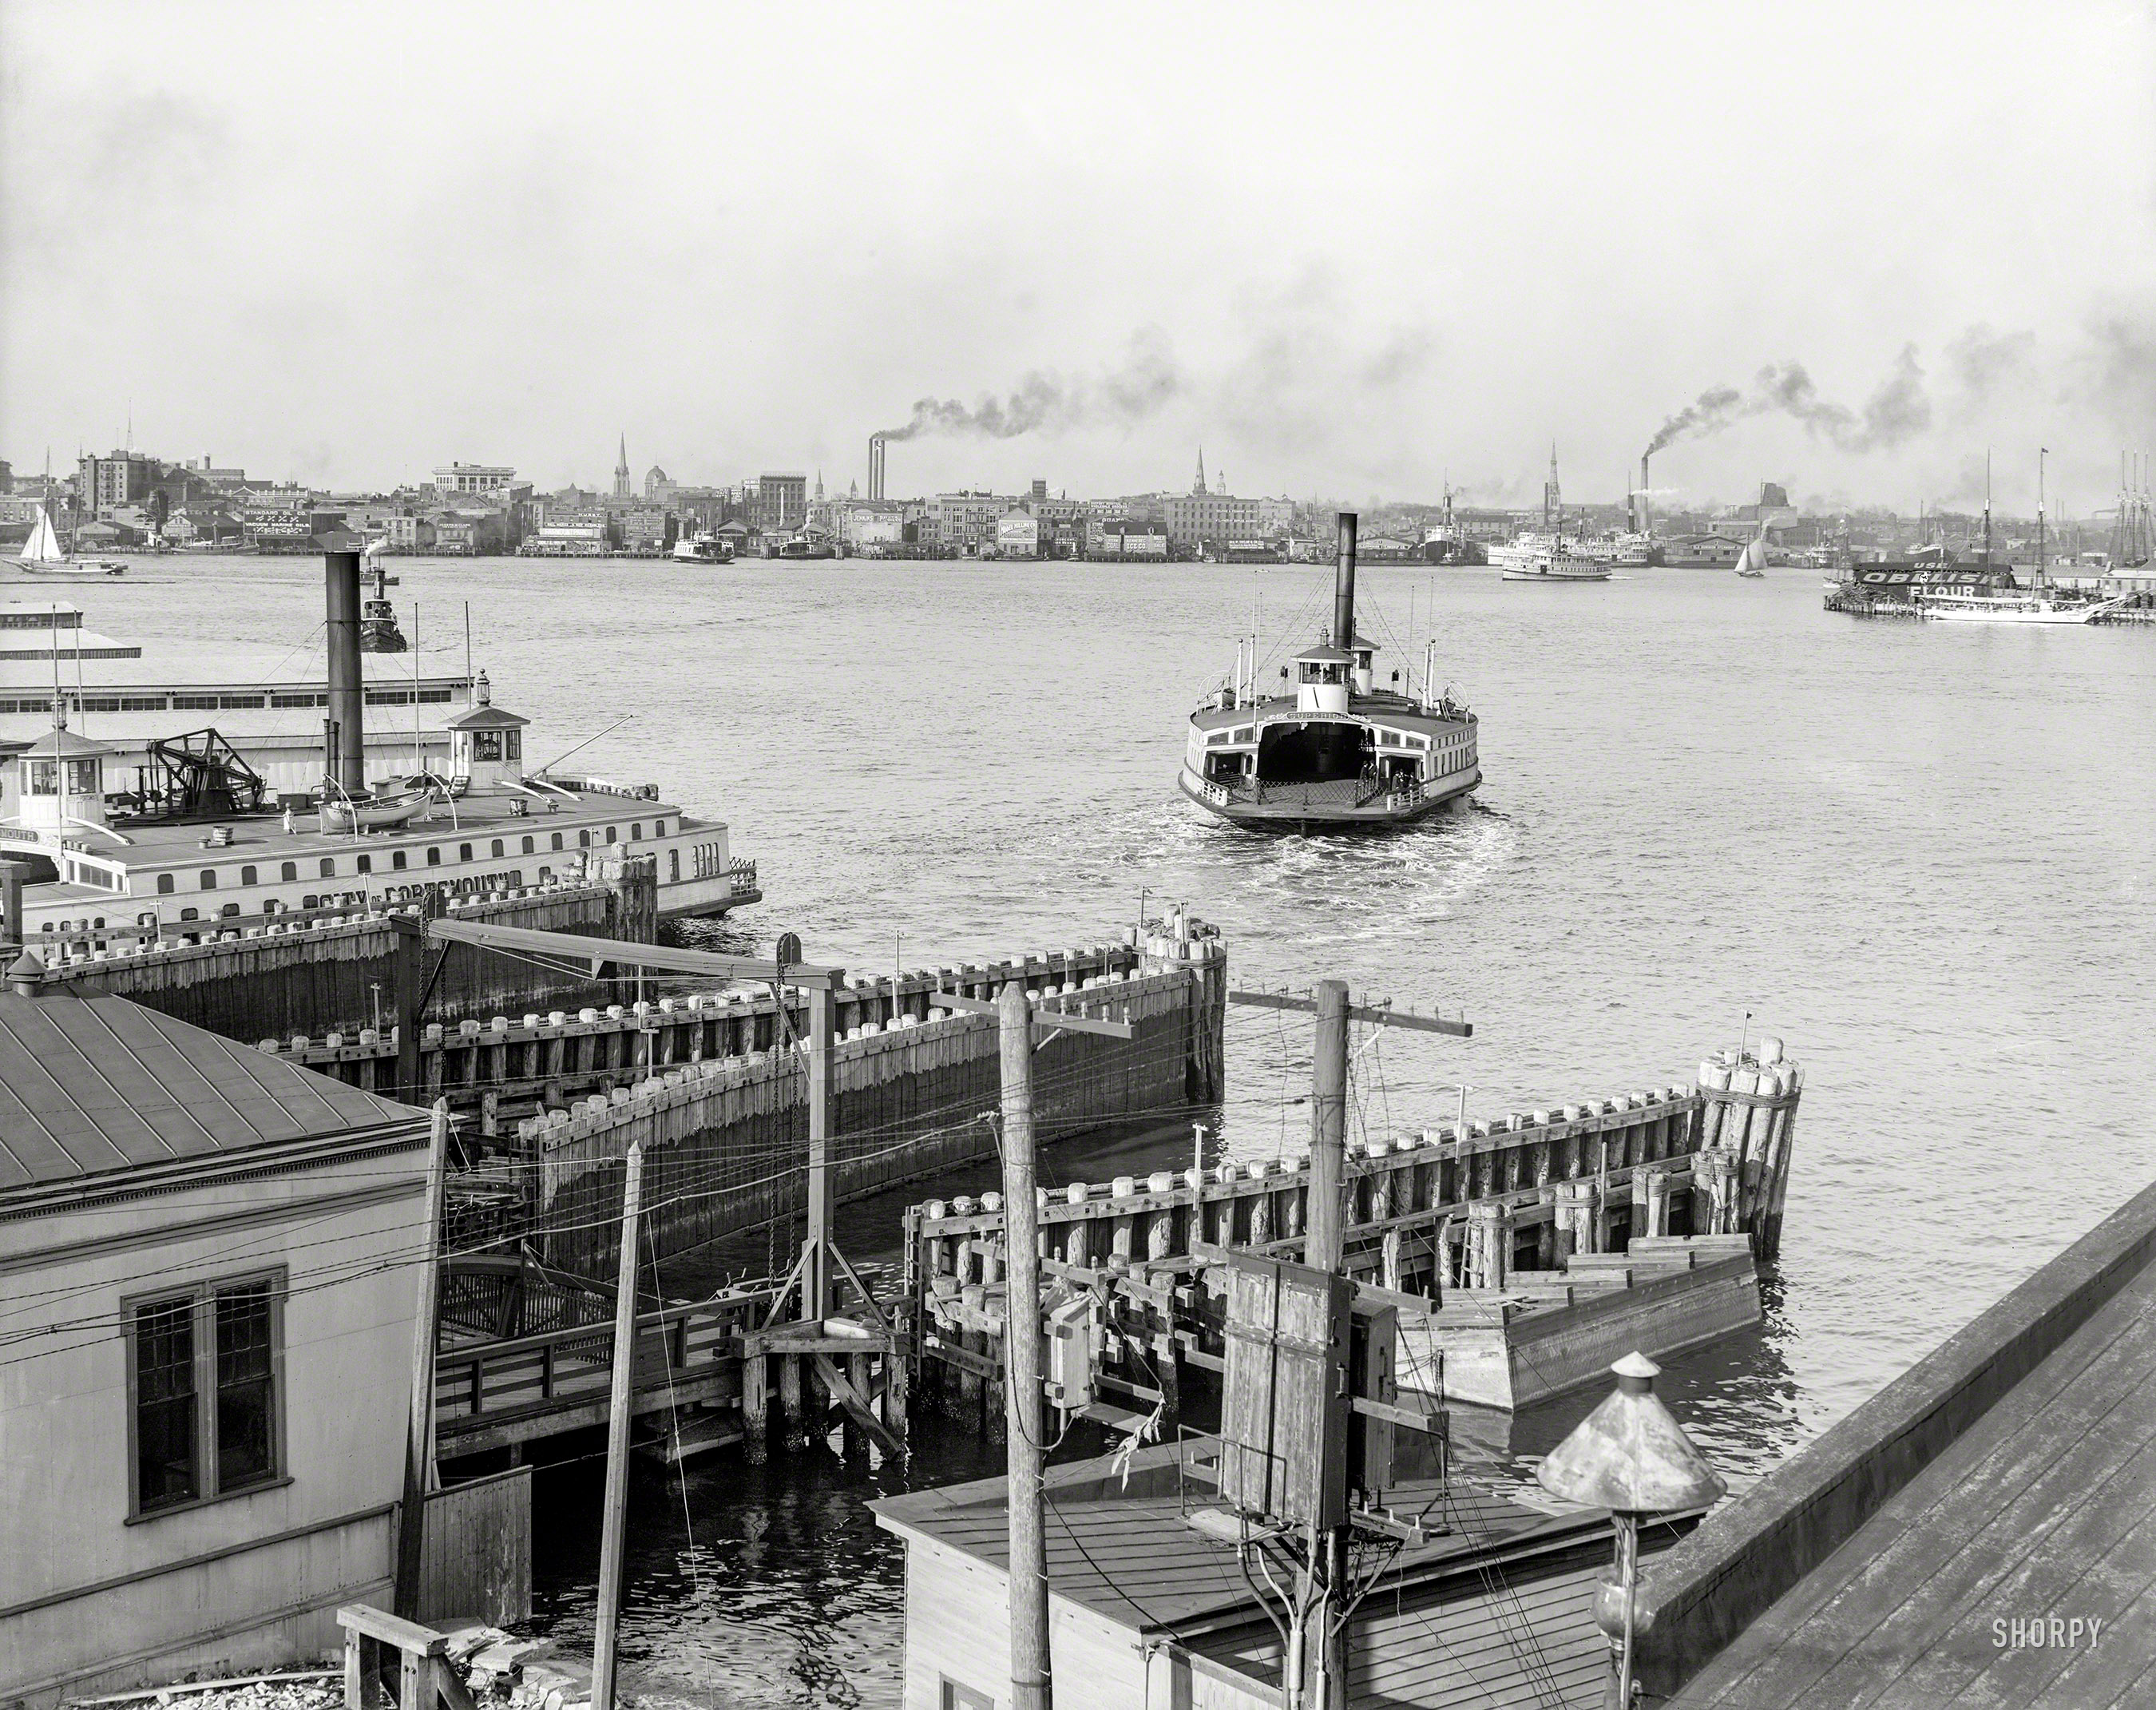 1905. "Waterfront -- Norfolk, Virginia." A going-away view of the ferry Superior. 8x10 inch dry plate glass negative, Detroit Publishing Company. View full size.